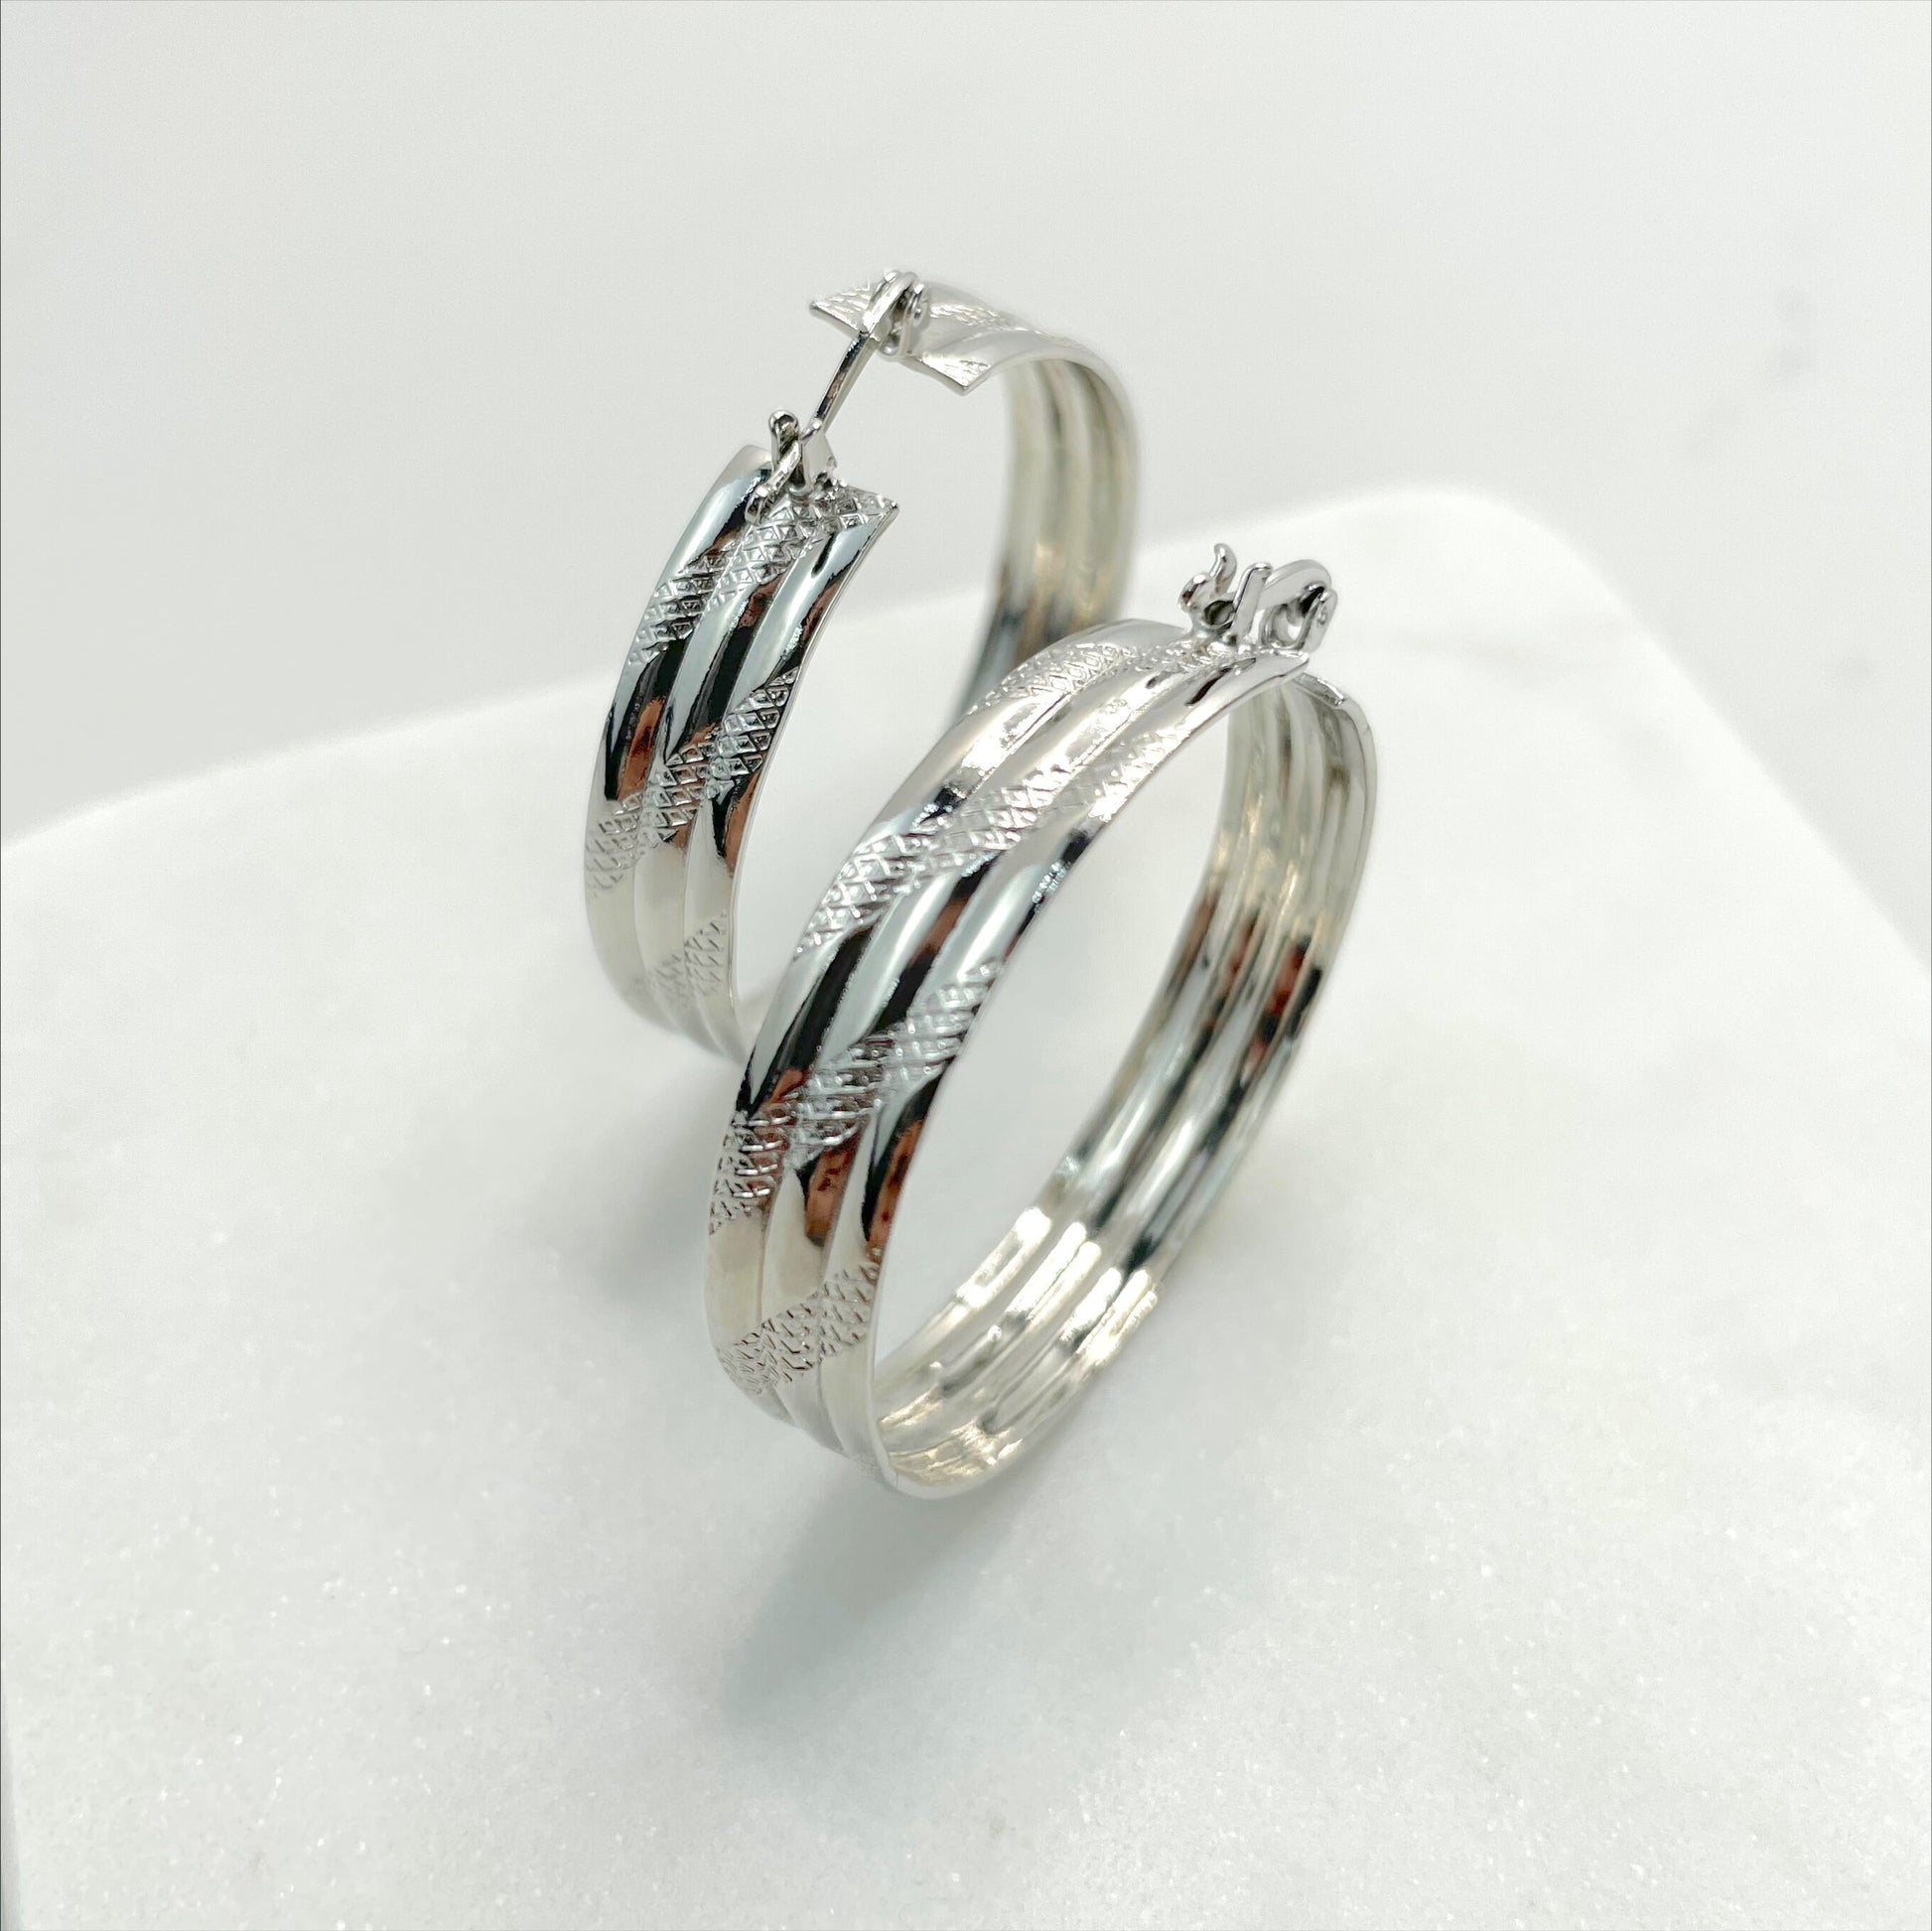 18k White or Gold Filled Two Tone Texturized 37mm x 42mm Hoop Earrings Wholesale Jewelry Supplies